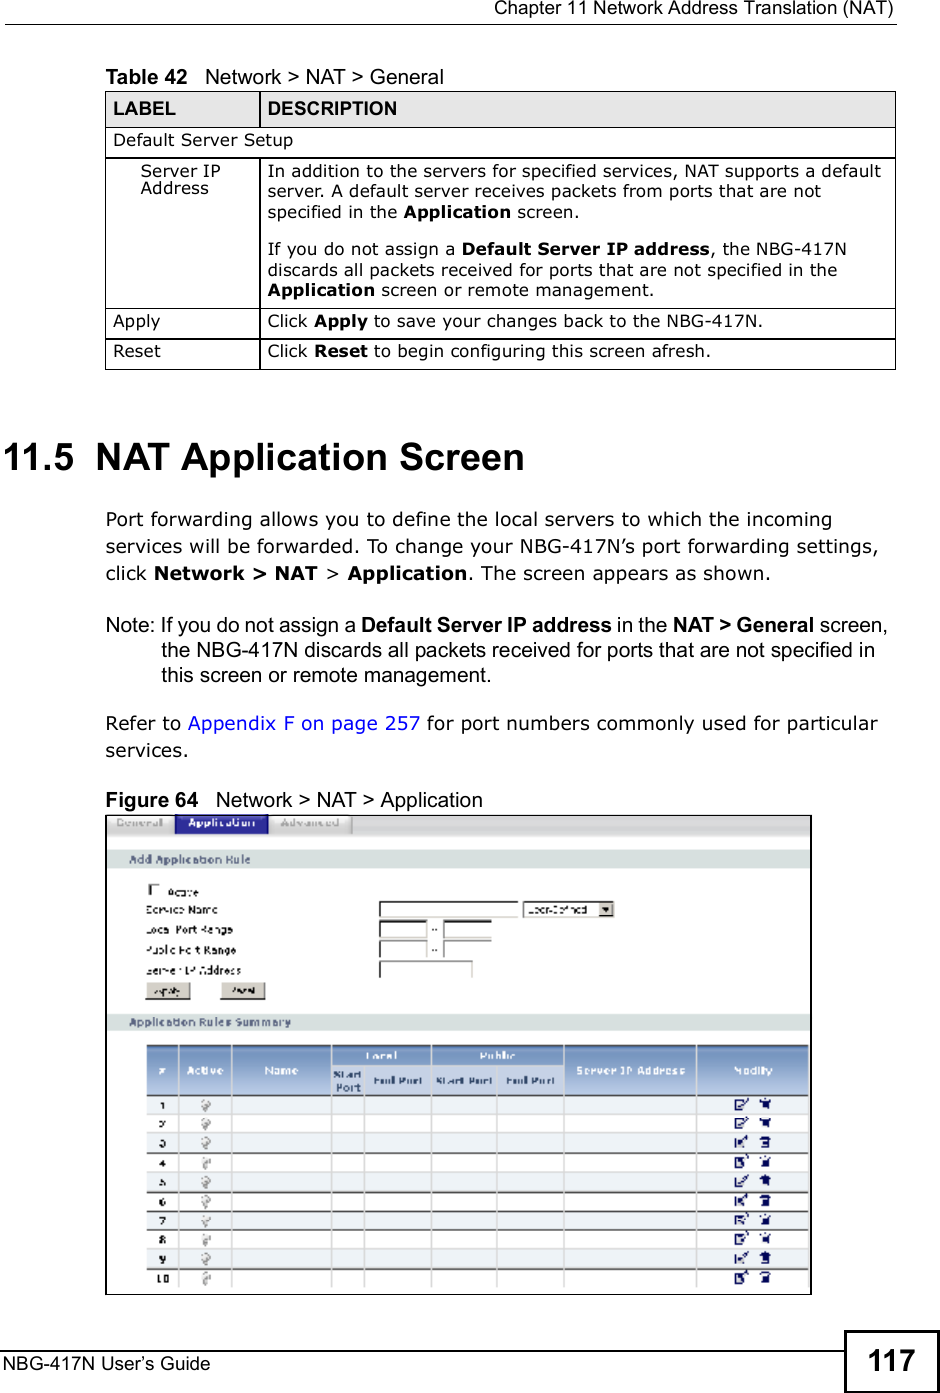  Chapter 11Network Address Translation (NAT)NBG-417N User s Guide 11711.5  NAT Application Screen   Port forwarding allows you to define the local servers to which the incoming services will be forwarded. To change your NBG-417N!s port forwarding settings, click Network &gt; NAT &gt; Application. The screen appears as shown.Note: If you do not assign a Default Server IP address in the NAT &gt; General screen, the NBG-417N discards all packets received for ports that are not specified in this screen or remote management.Refer to Appendix F on page 257 for port numbers commonly used for particular services.Figure 64   Network &gt; NAT &gt; Application Default Server SetupServer IP AddressIn addition to the servers for specified services, NAT supports a default server. A default server receives packets from ports that are not specified in the Application screen. If you do not assign a Default Server IP address, the NBG-417N discards all packets received for ports that are not specified in the Application screen or remote management.Apply Click Apply to save your changes back to the NBG-417N.Reset Click Reset to begin configuring this screen afresh.Table 42   Network &gt; NAT &gt; GeneralLABEL DESCRIPTION